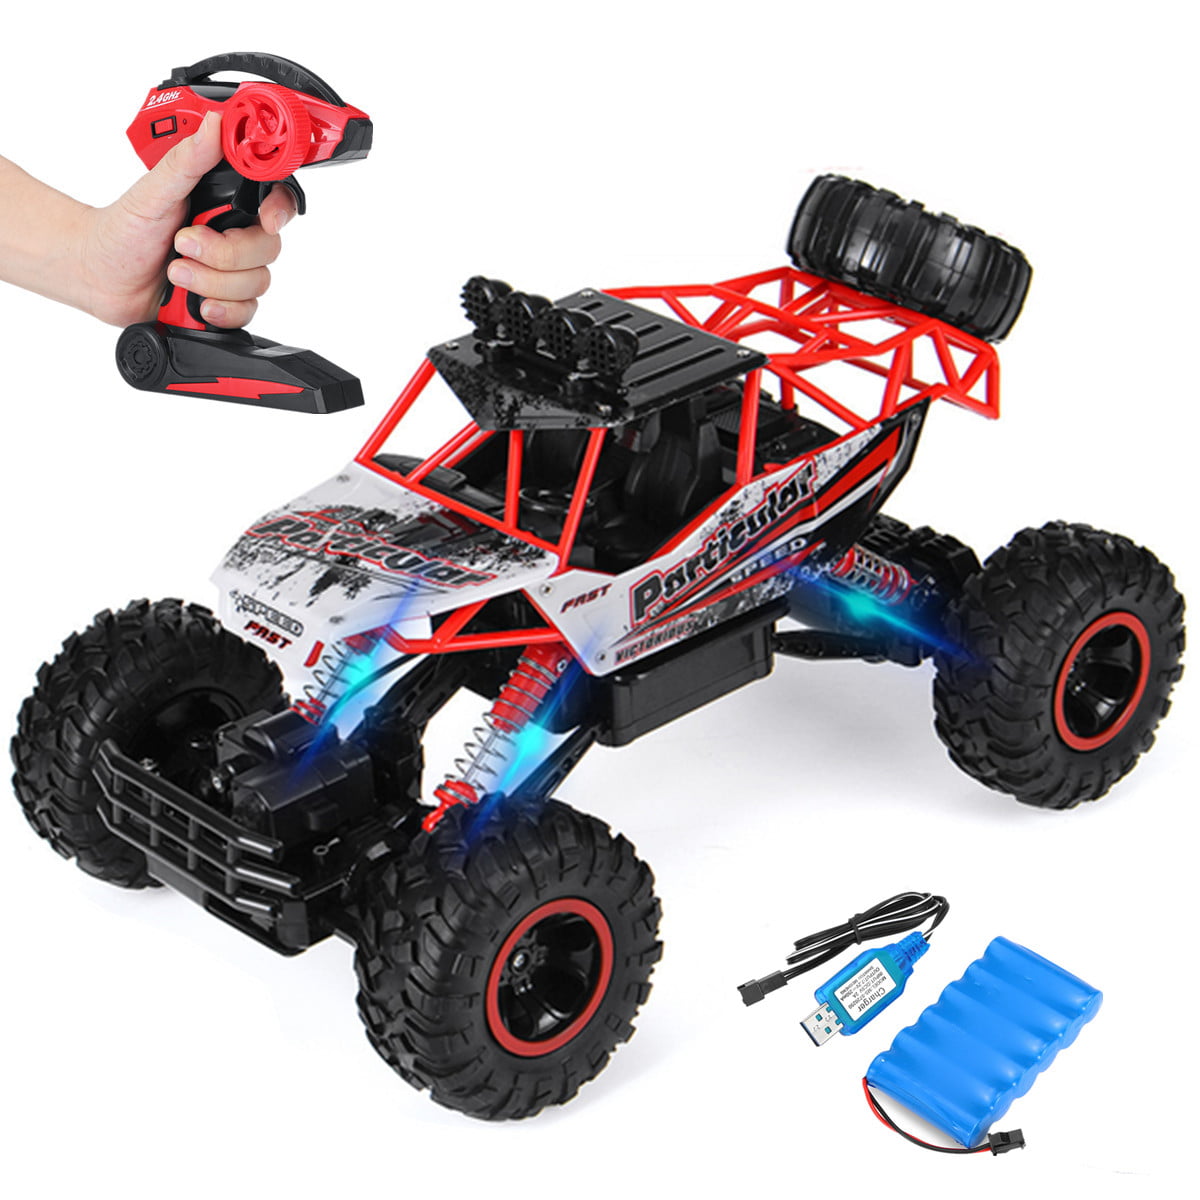 RC4WD Plastic High Lift Jack 140mm For 1/10 Scale RC 4WD Axial Crawlers Monster Trucks 